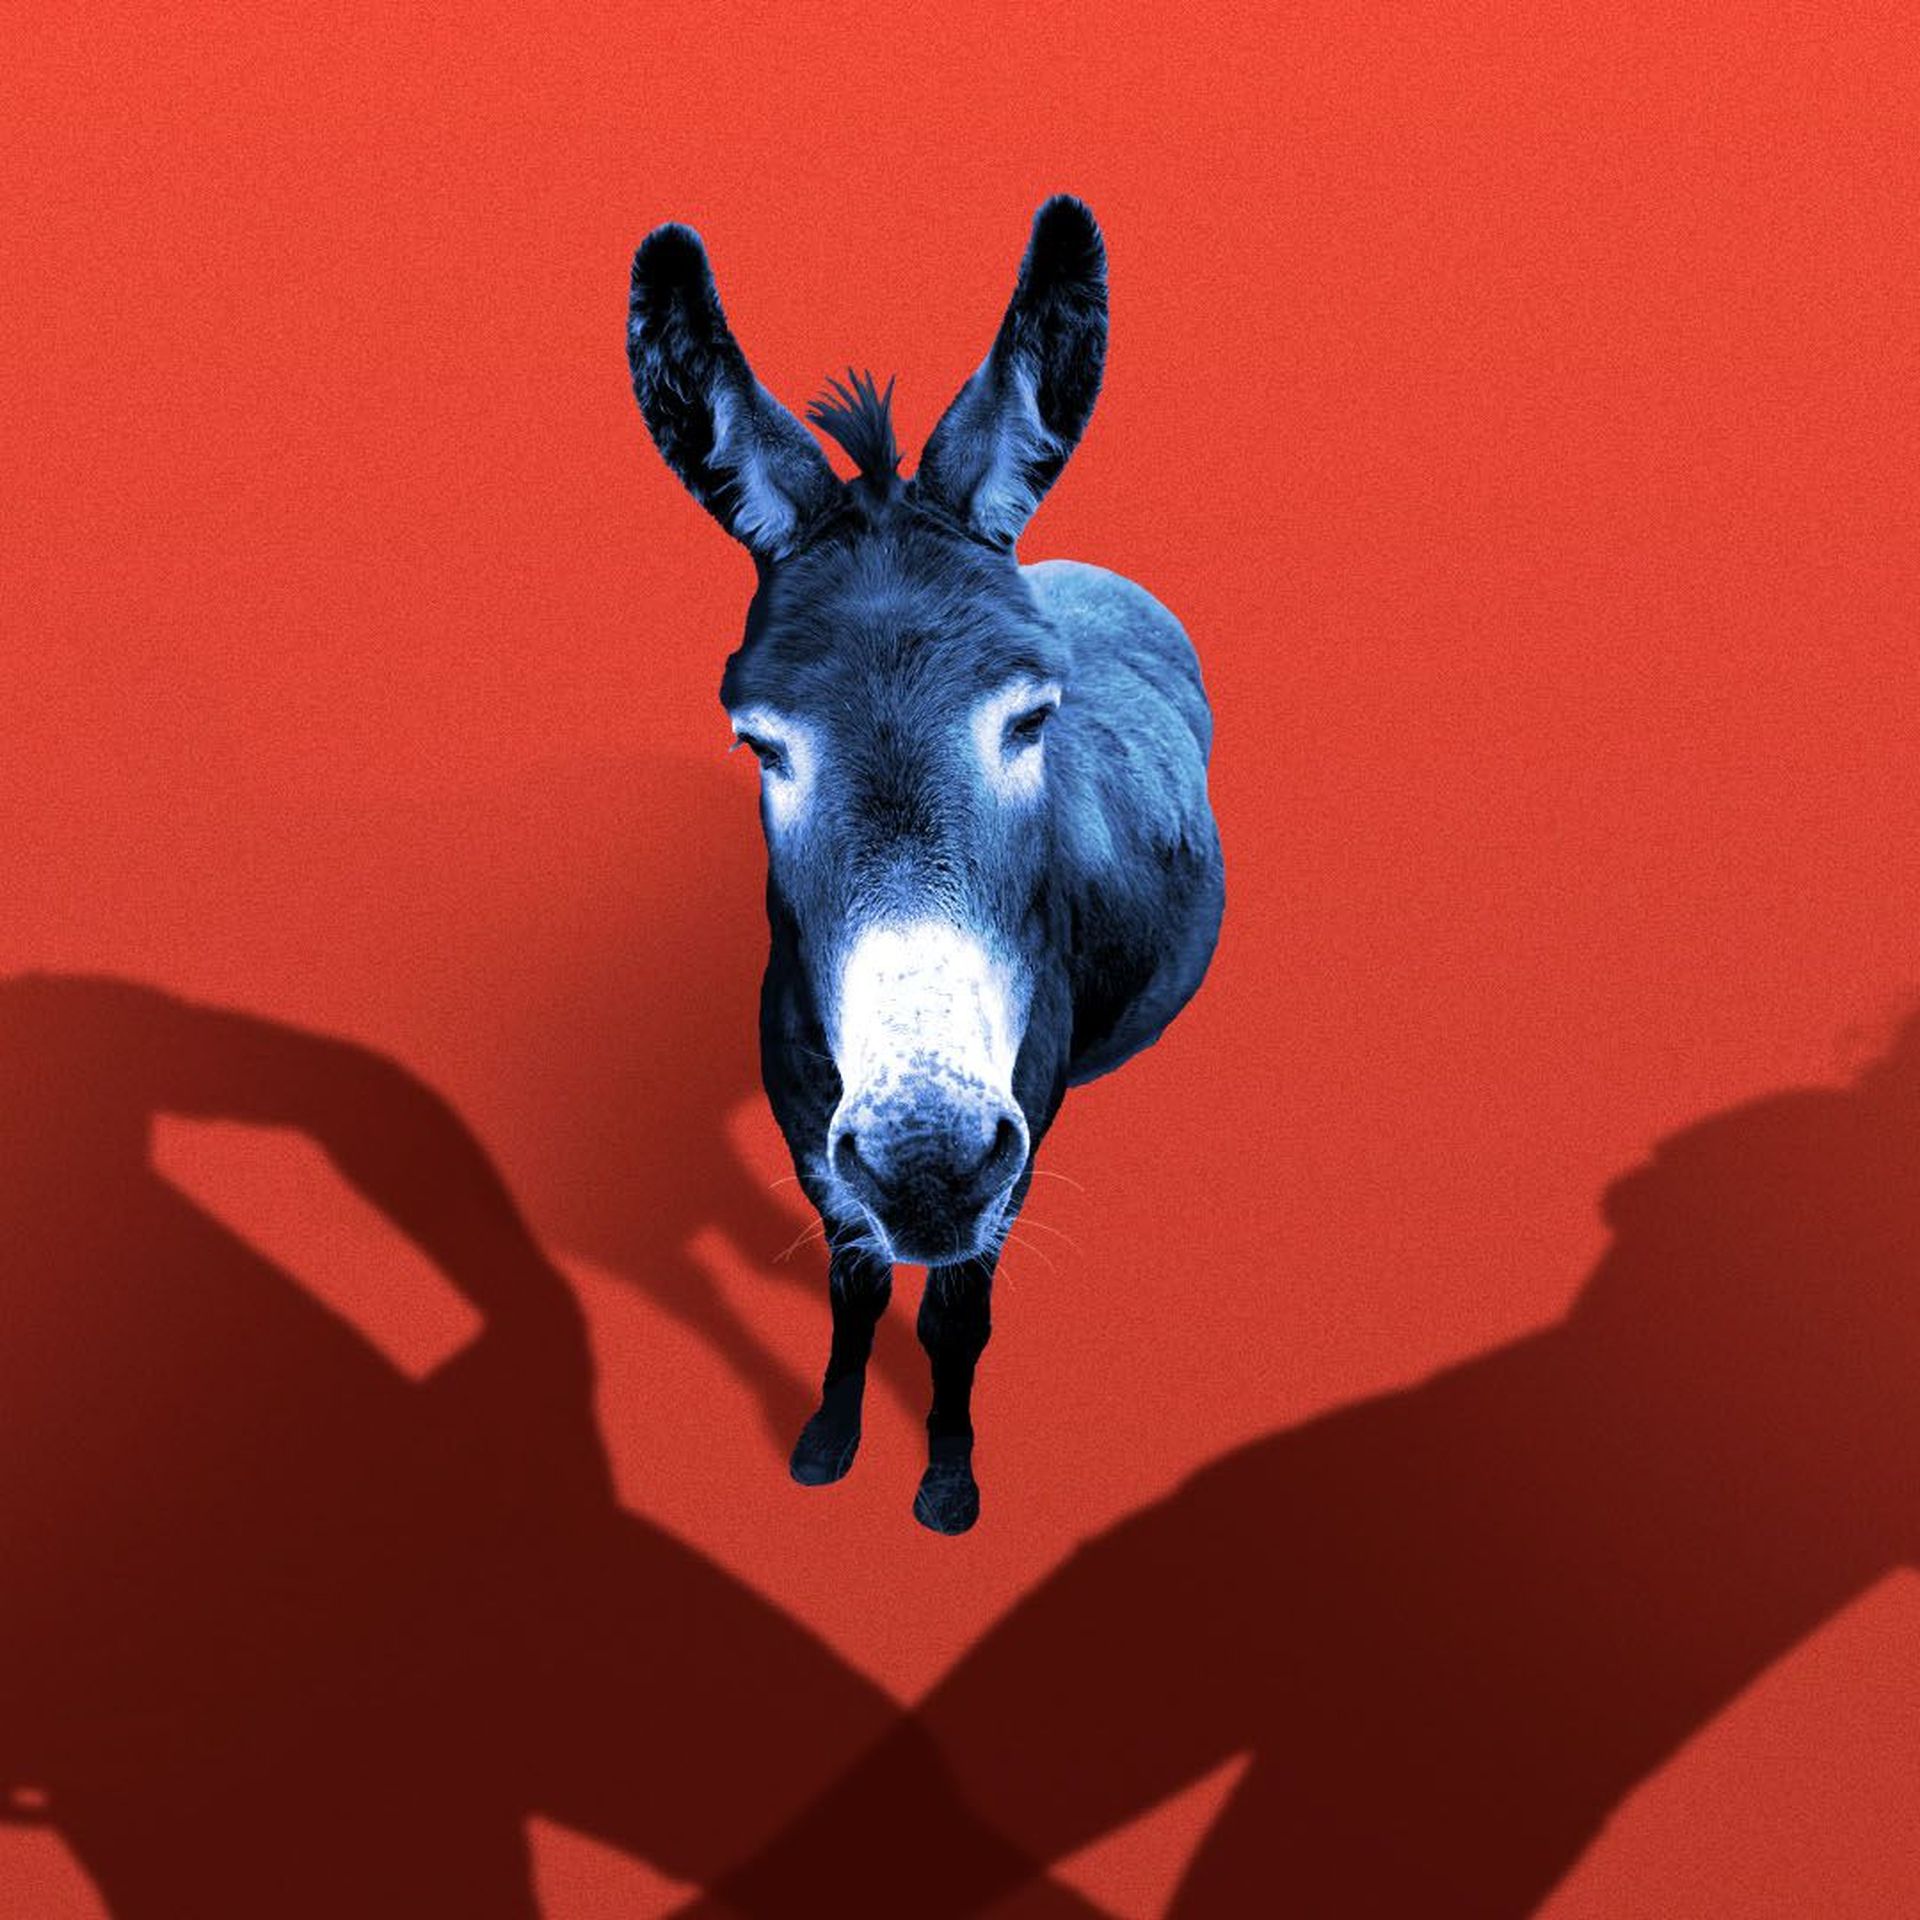 Illustration of a blue donkey with the shadows of two people on either side of it